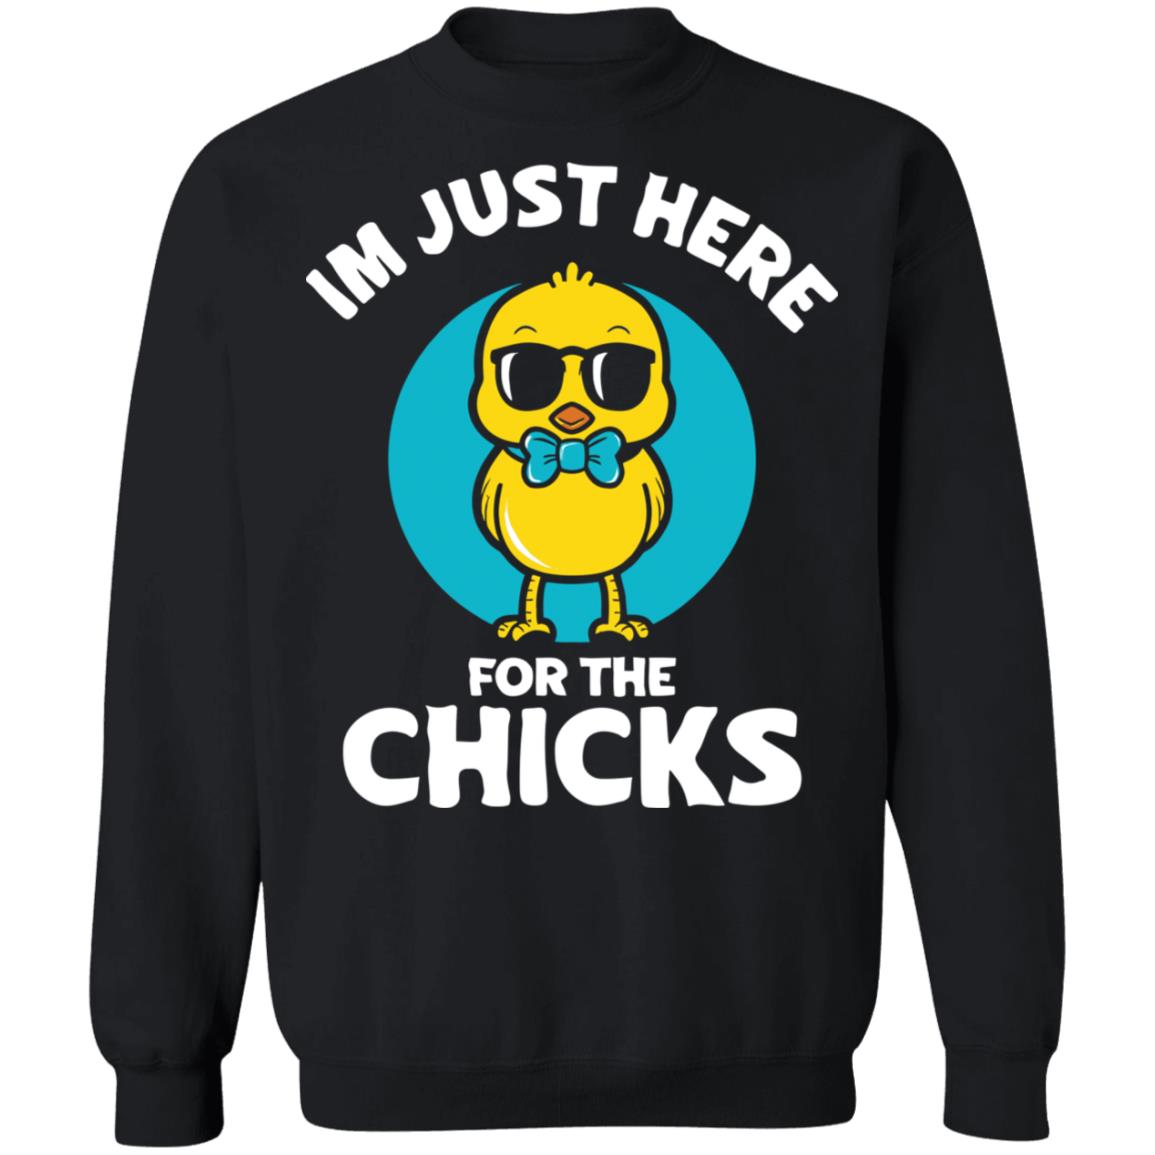 I’m Just Here For The Chicks Shirt 1